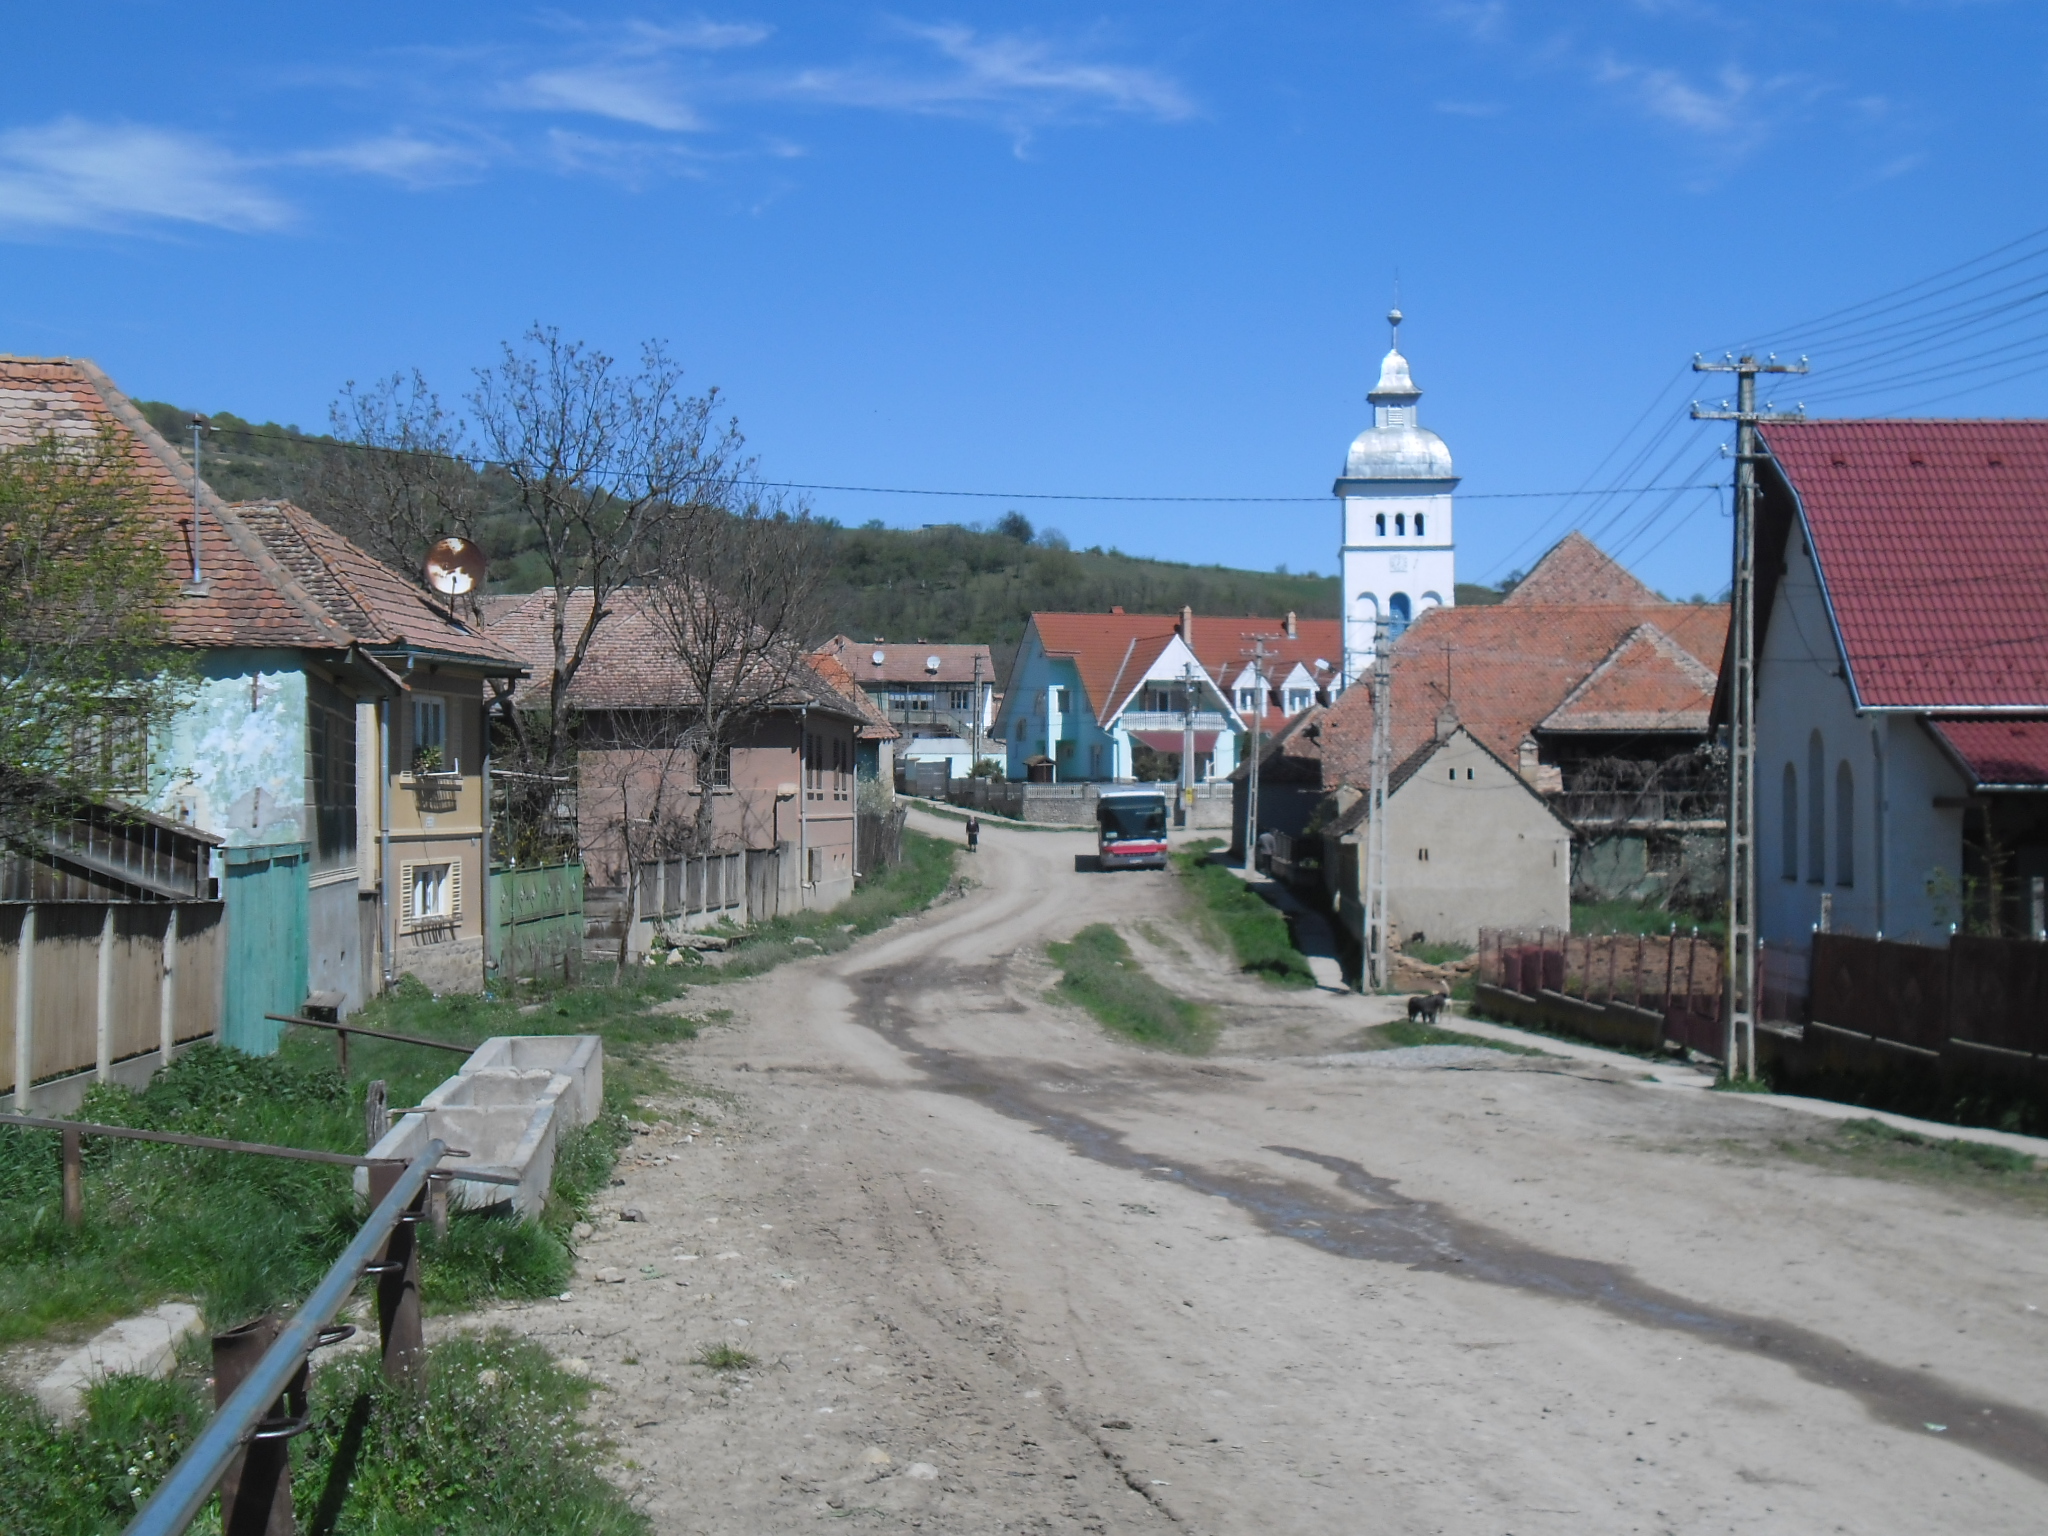 an empty street in the village with houses